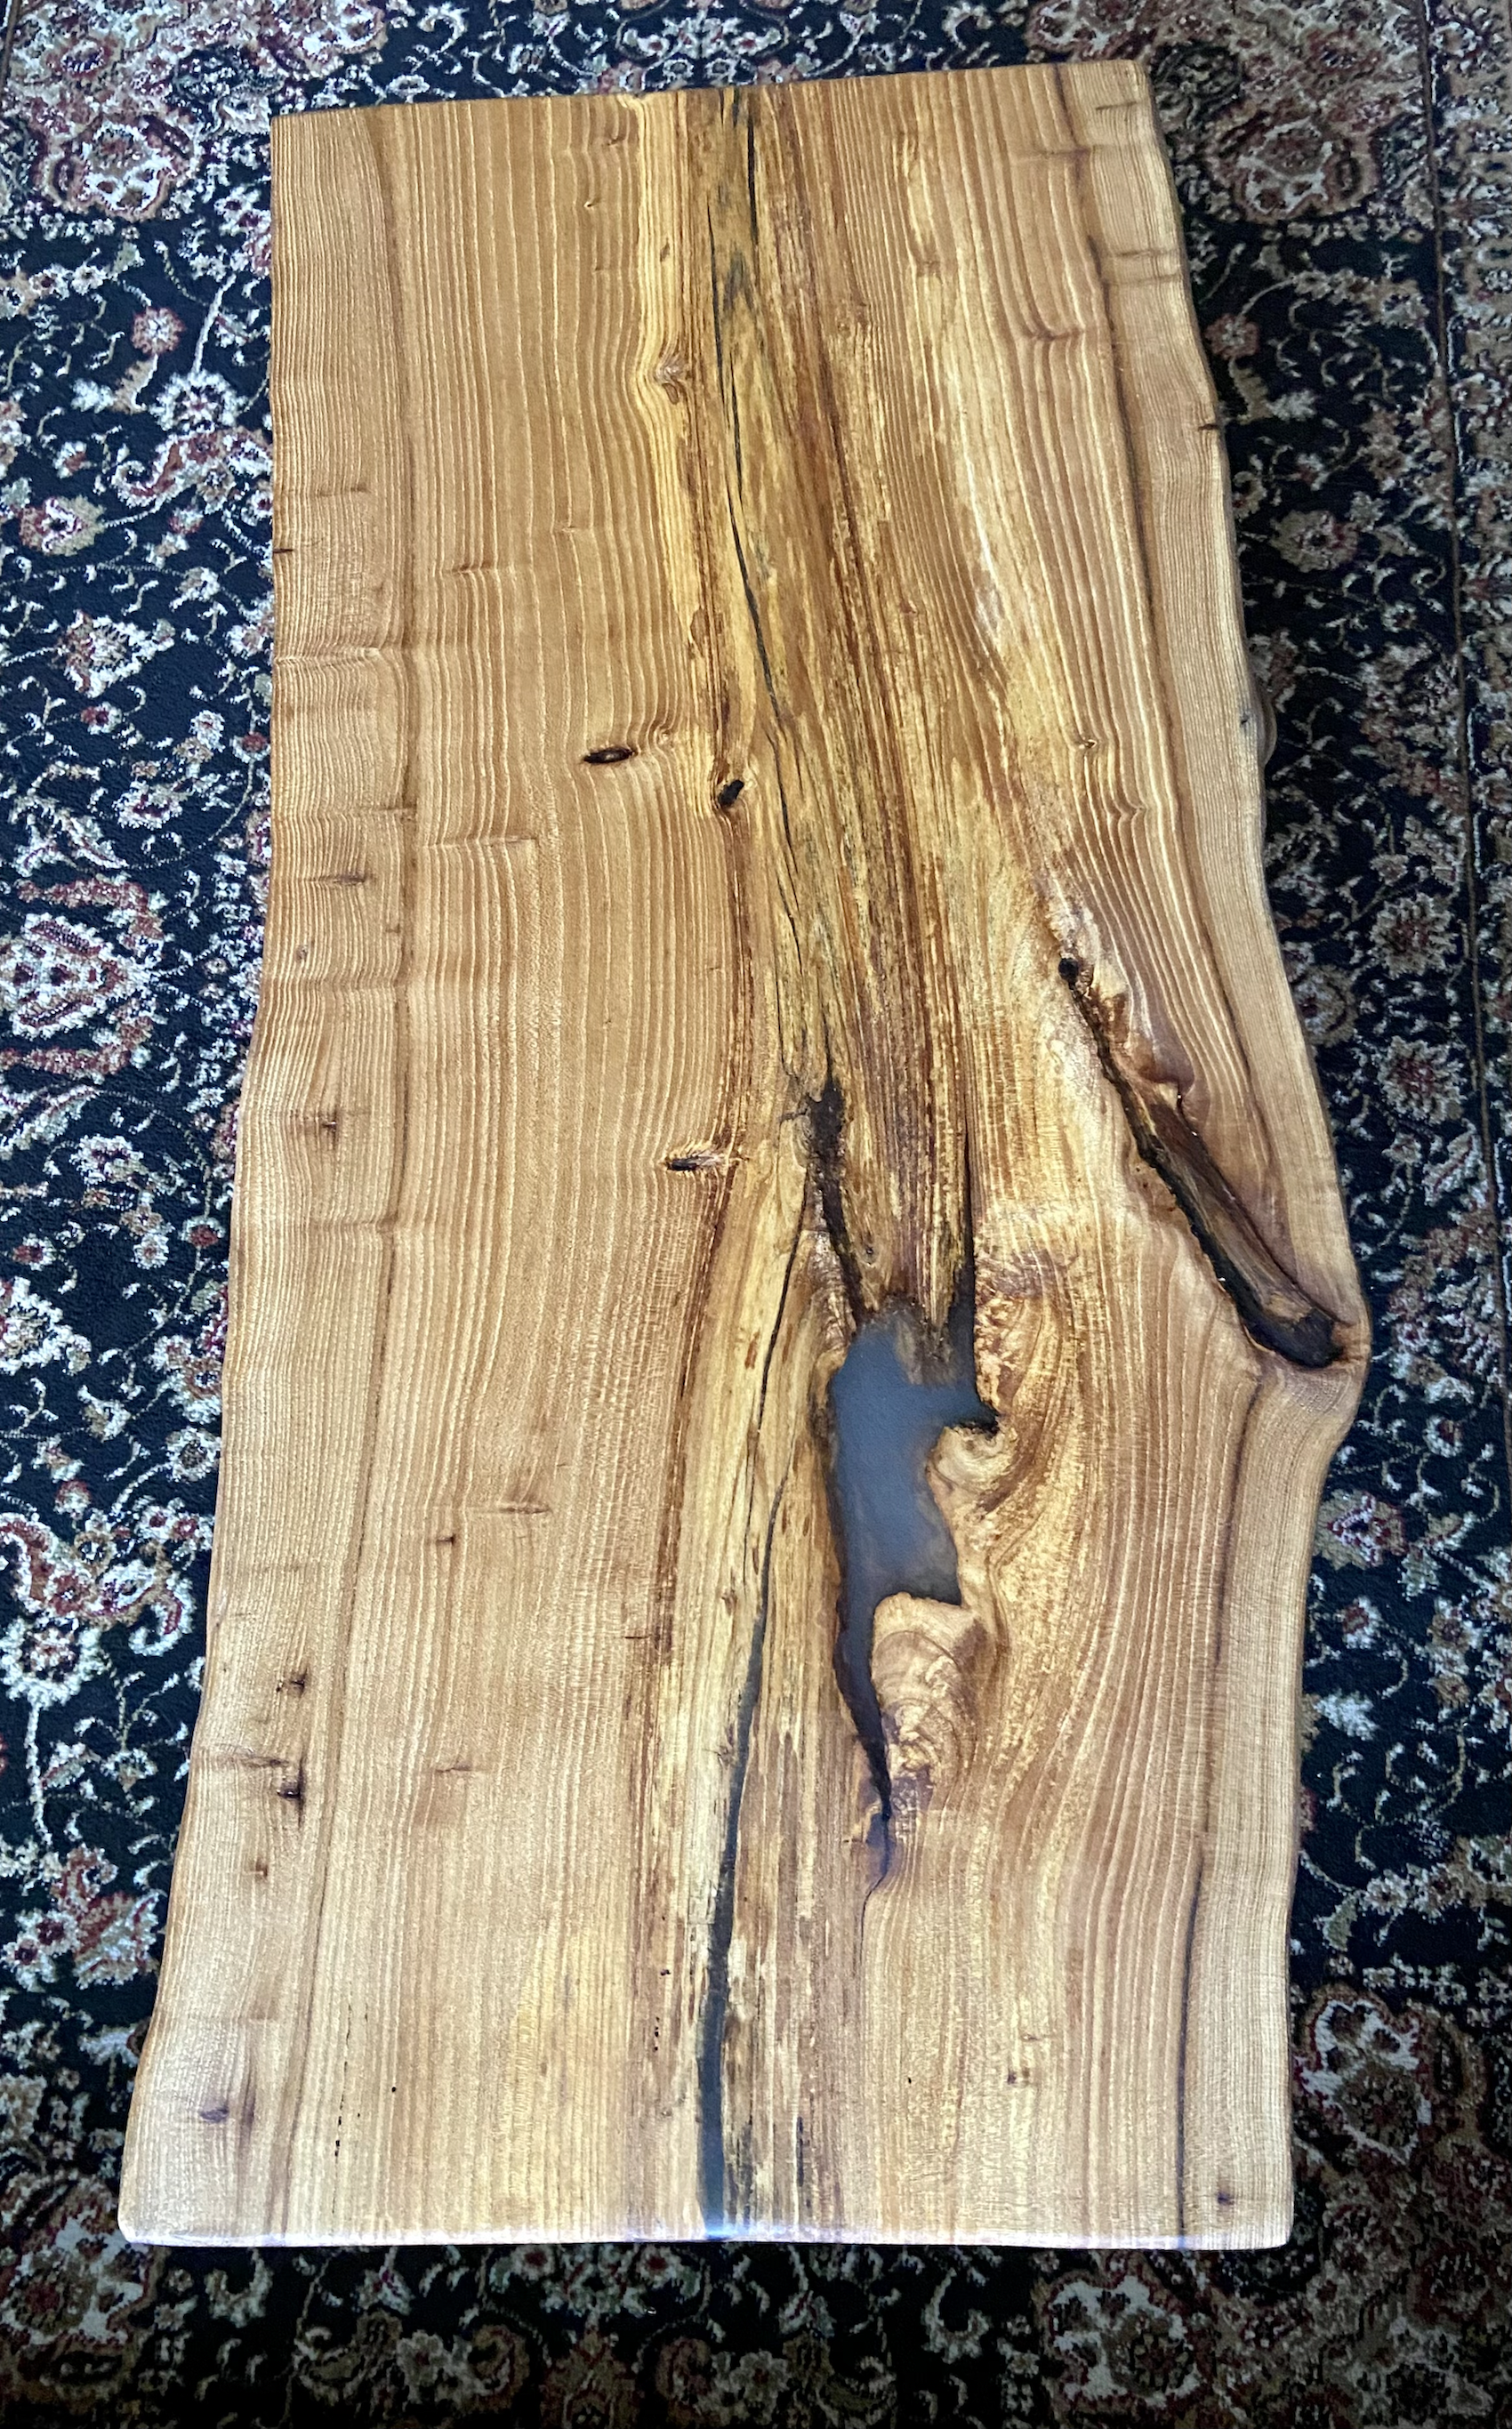 Live Edge Wormy Chestnut Coffee Table w/ Beautiful Natural Voids, Grain Patterns, and Knots